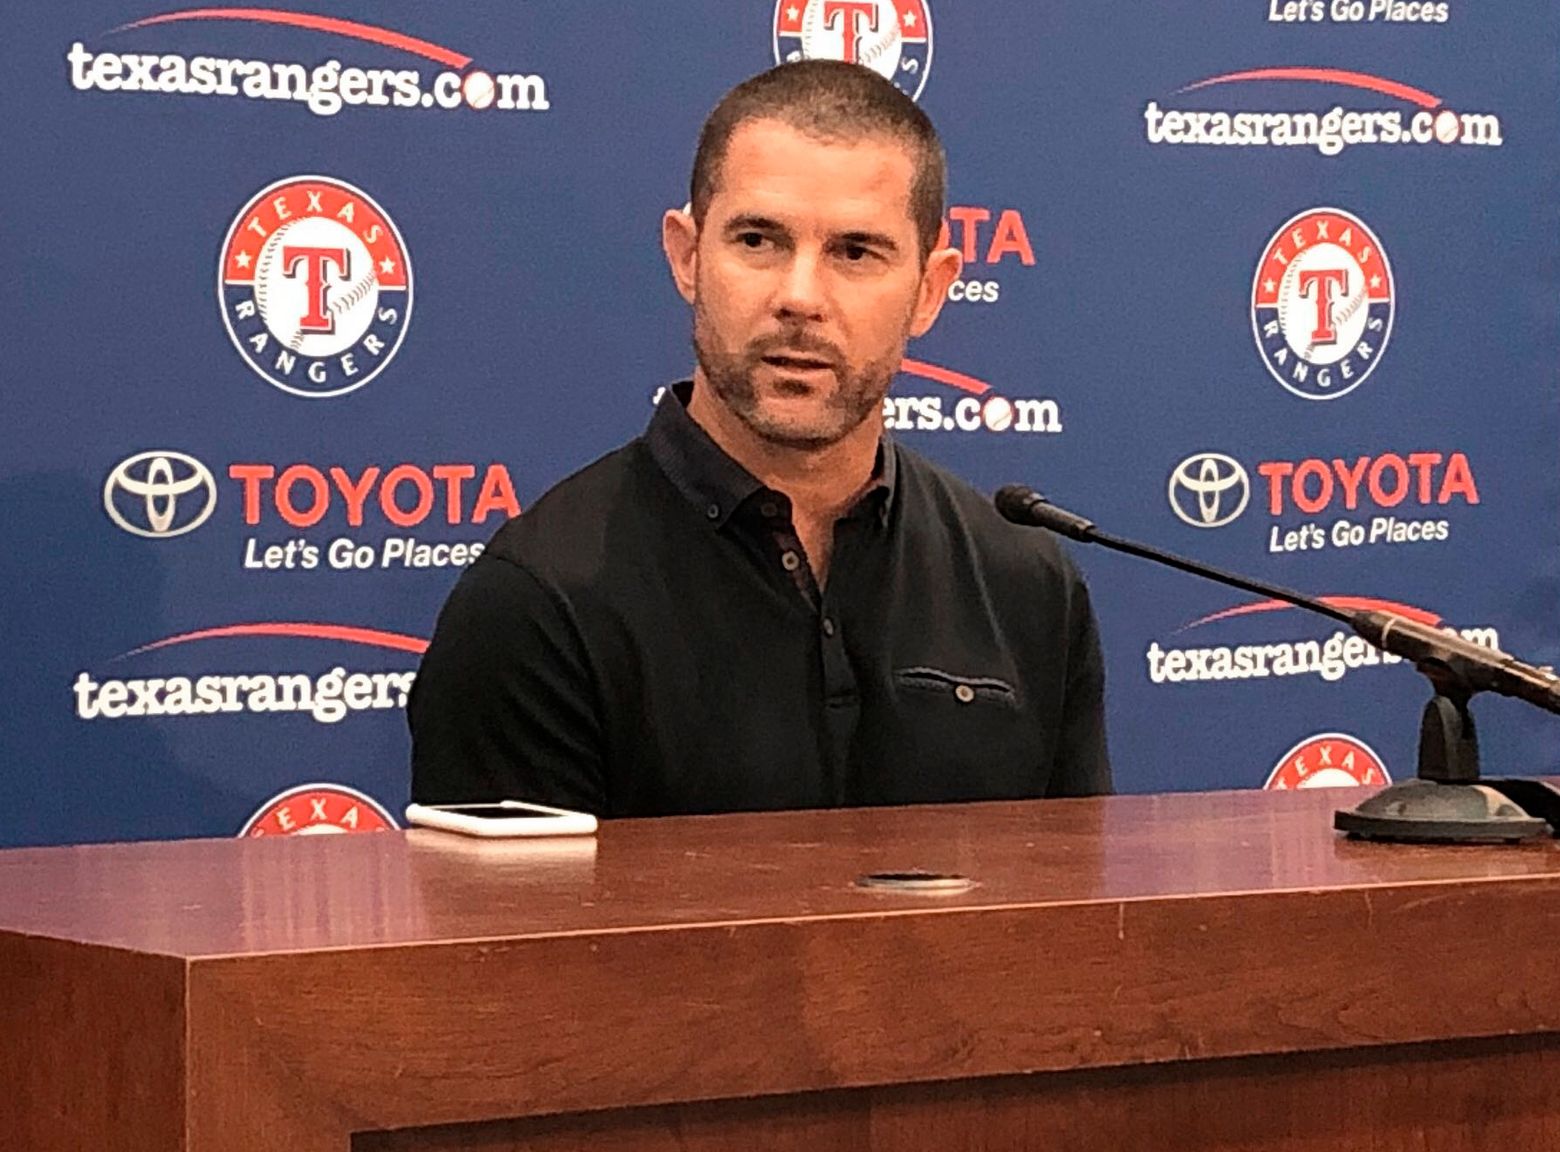 Rangers will retire Michael Young's No. 10 jersey in August